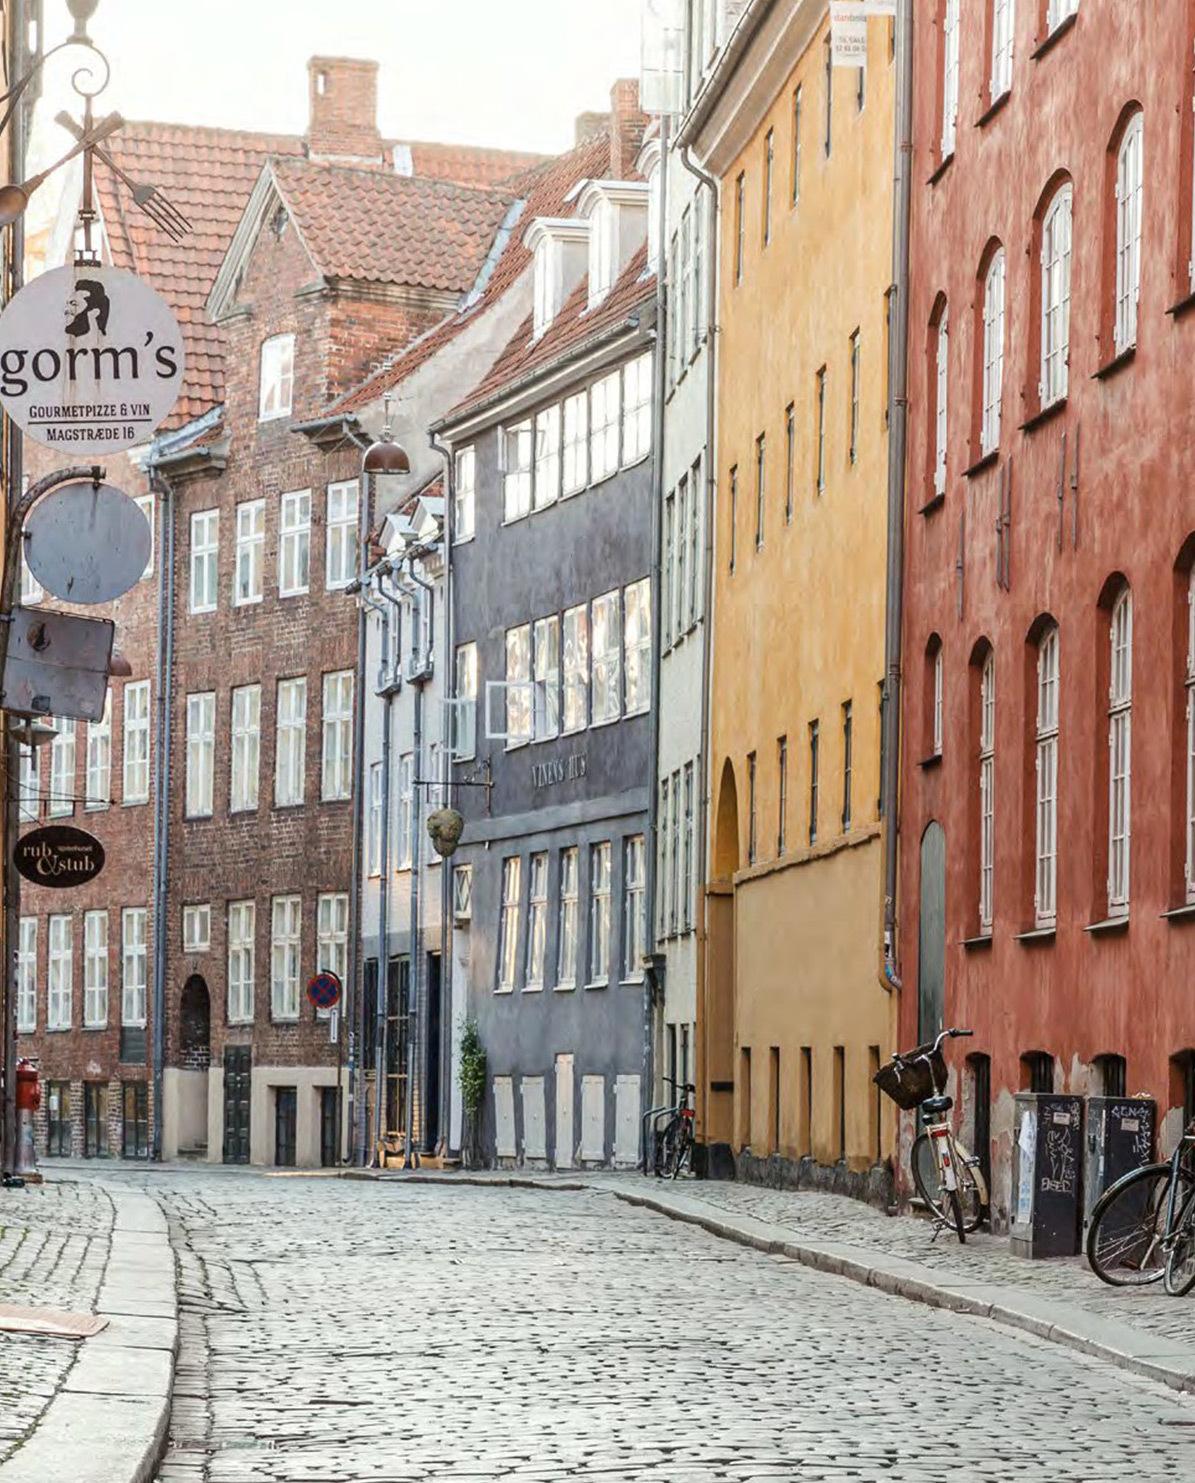 Buch Cereal City Guide: Copenhagen One Size